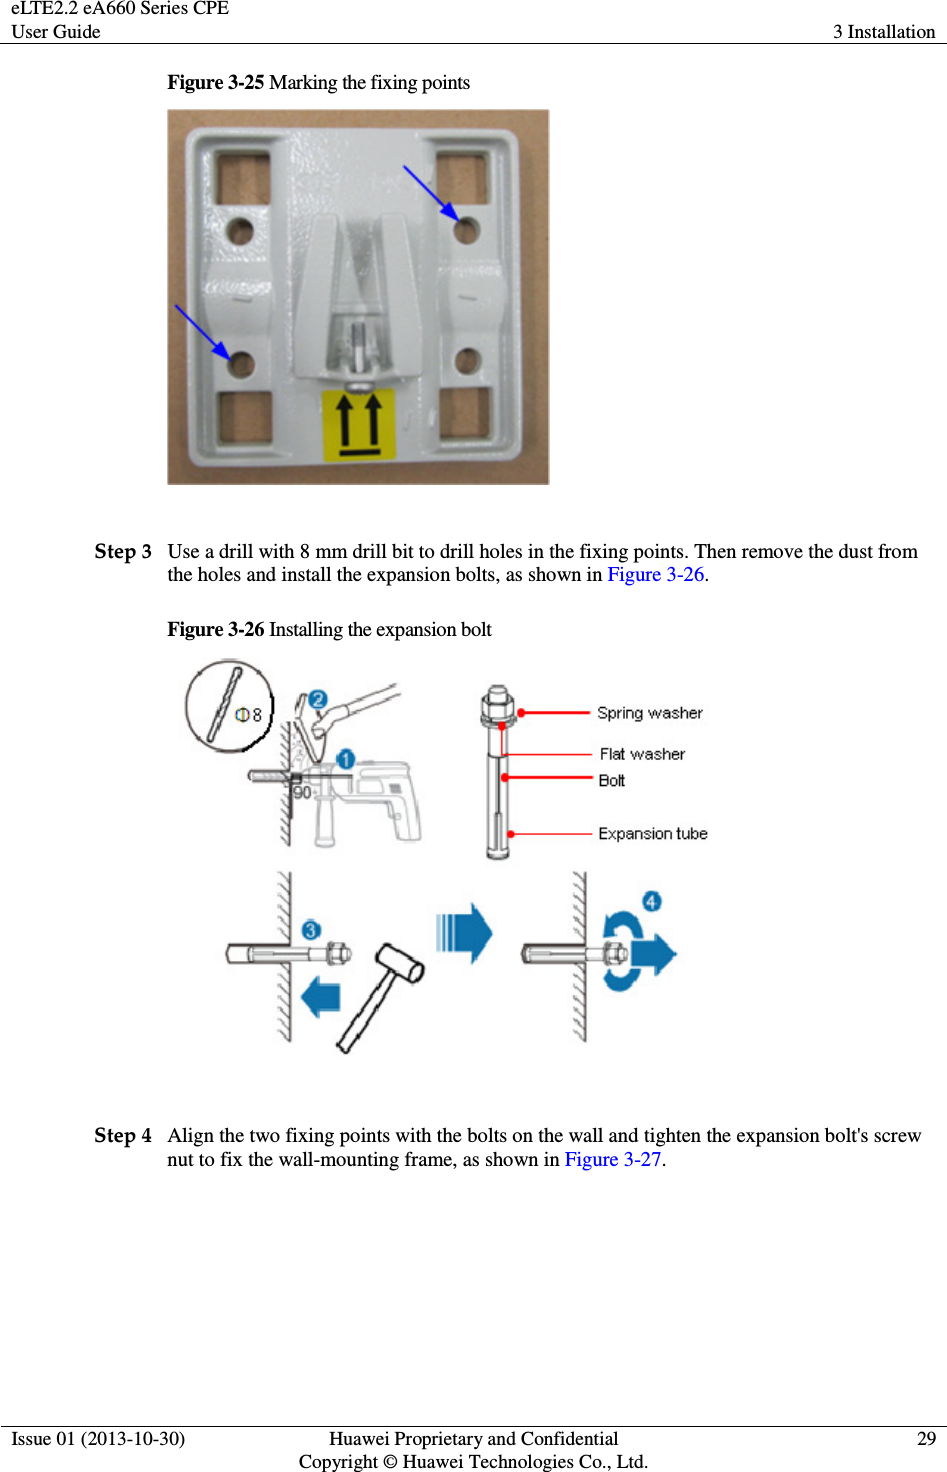 eLTE2.2 eA660 Series CPE User Guide  3 Installation  Issue 01 (2013-10-30)  Huawei Proprietary and Confidential                                     Copyright © Huawei Technologies Co., Ltd. 29  Figure 3-25 Marking the fixing points   Step 3 Use a drill with 8 mm drill bit to drill holes in the fixing points. Then remove the dust from the holes and install the expansion bolts, as shown in Figure 3-26. Figure 3-26 Installing the expansion bolt   Step 4 Align the two fixing points with the bolts on the wall and tighten the expansion bolt&apos;s screw nut to fix the wall-mounting frame, as shown in Figure 3-27. 